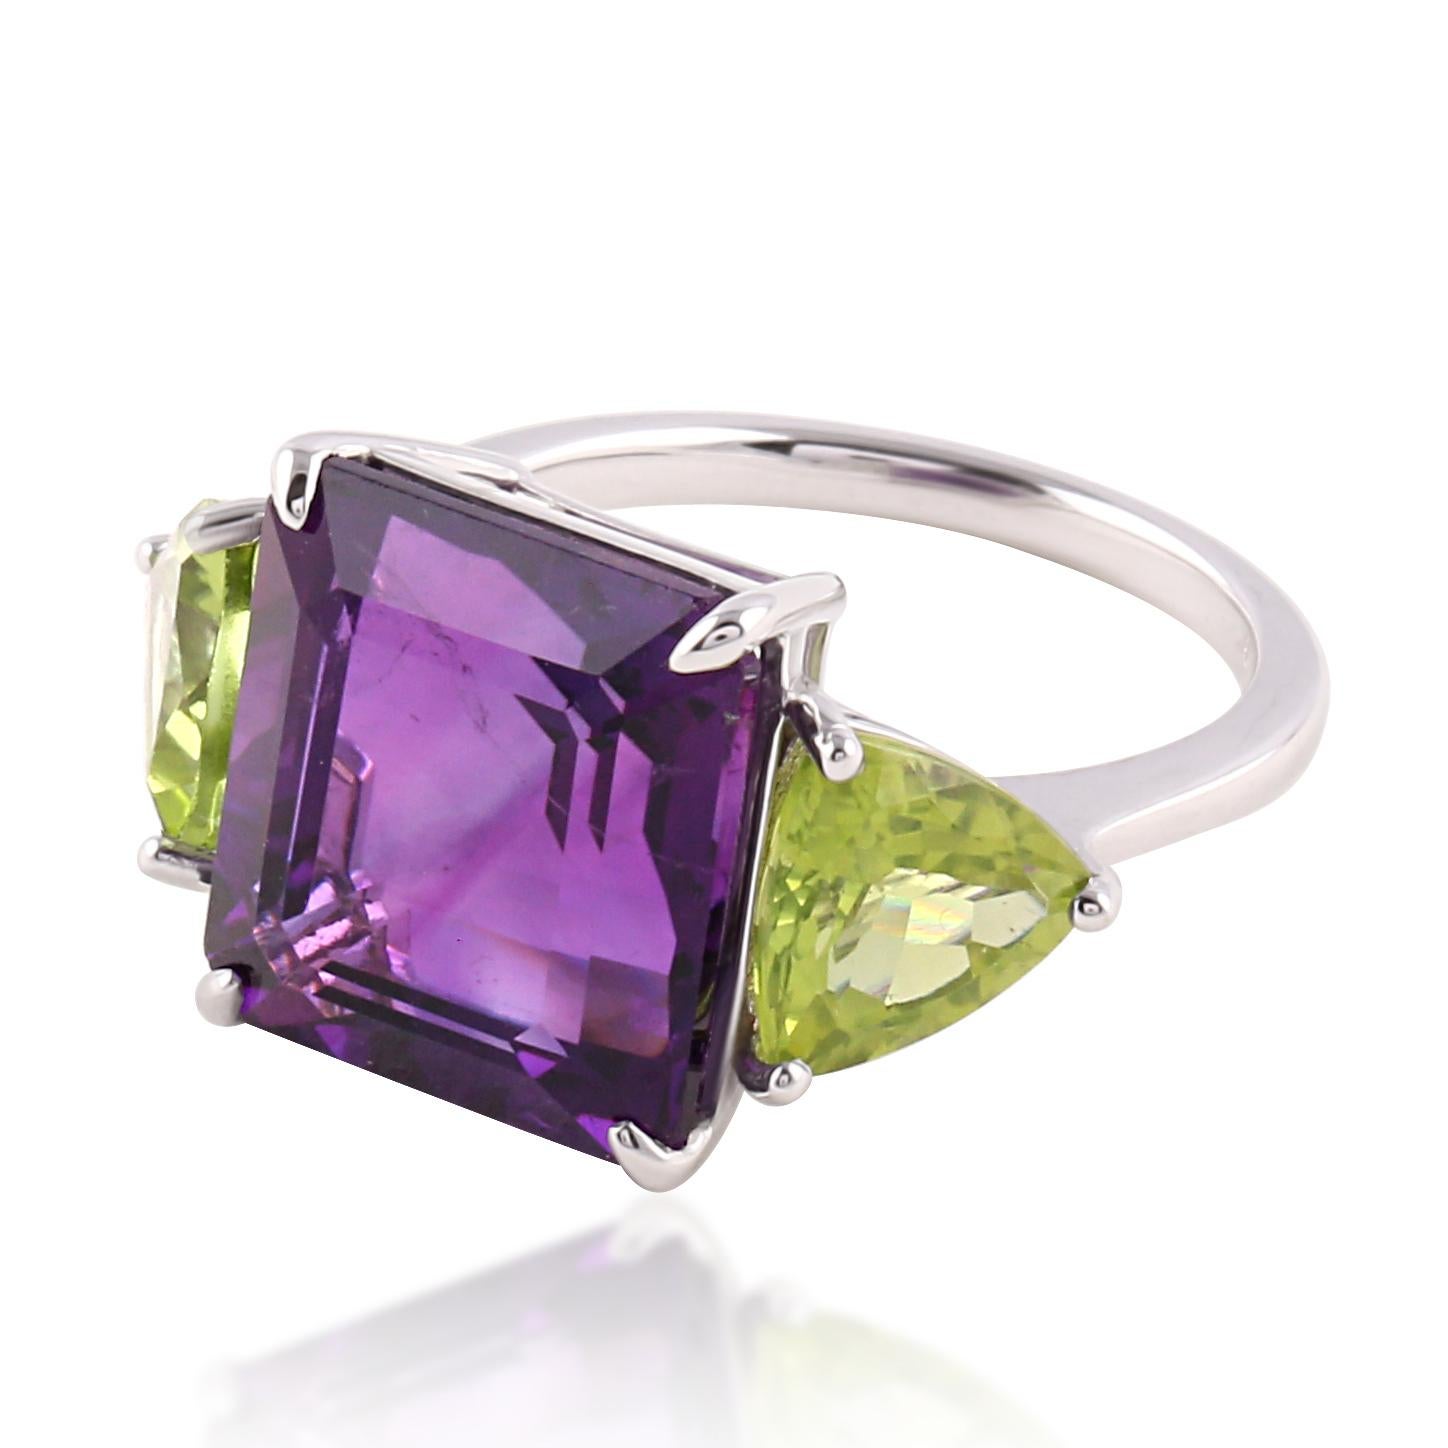 18 Karat White Gold 8.79 Carat Amethyst and Peridot Three-Stone Ring

This classic three-stone ring is glorified with the mix of semi-precious stones merging both amethyst and peridot together. The radiant square-cut amethyst supported by the fancy